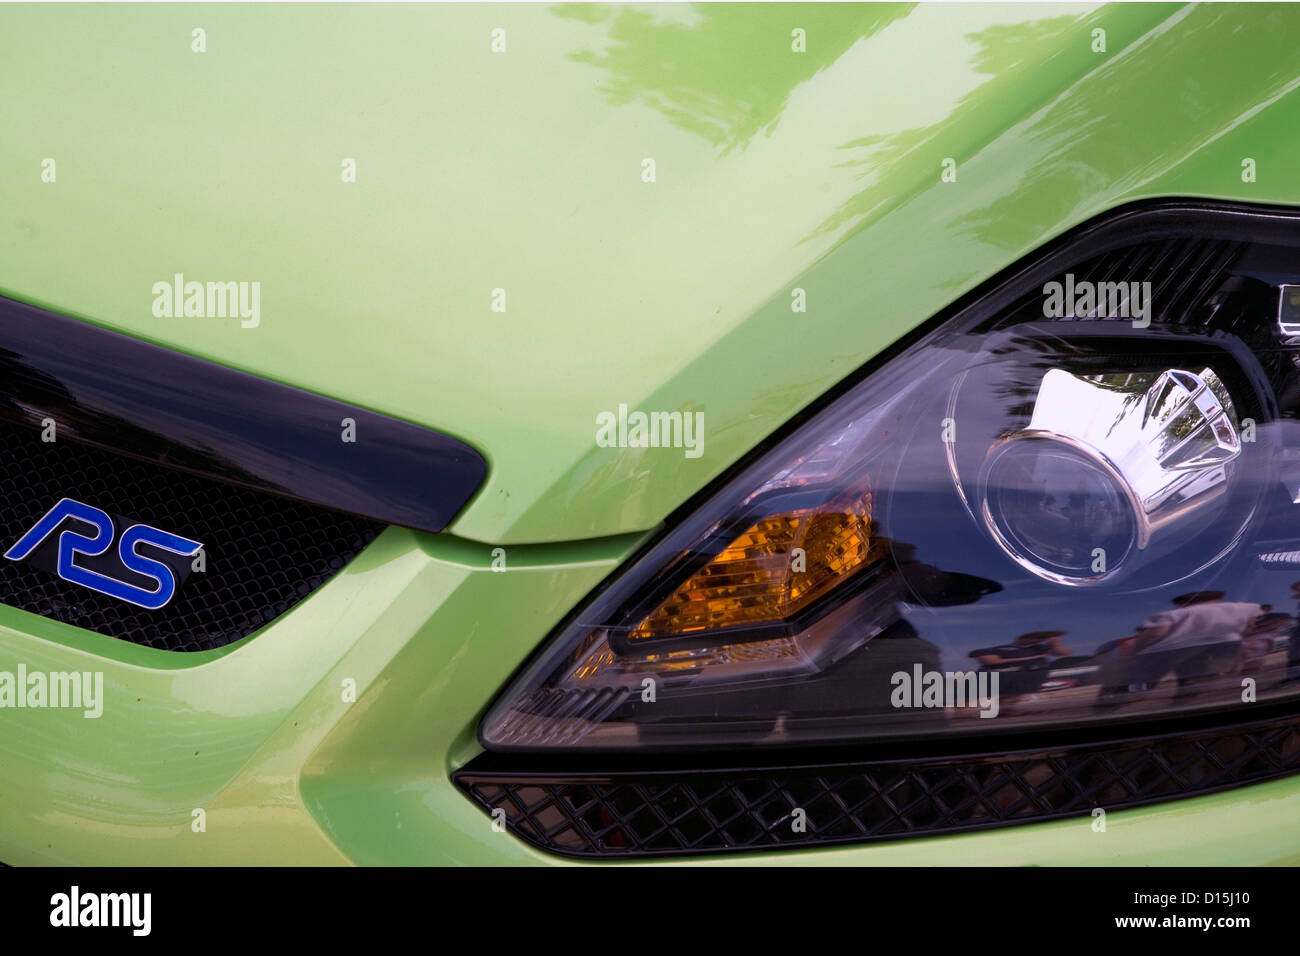 The front badge and headlight of a Ford Focus RS car Stock Photo - Alamy